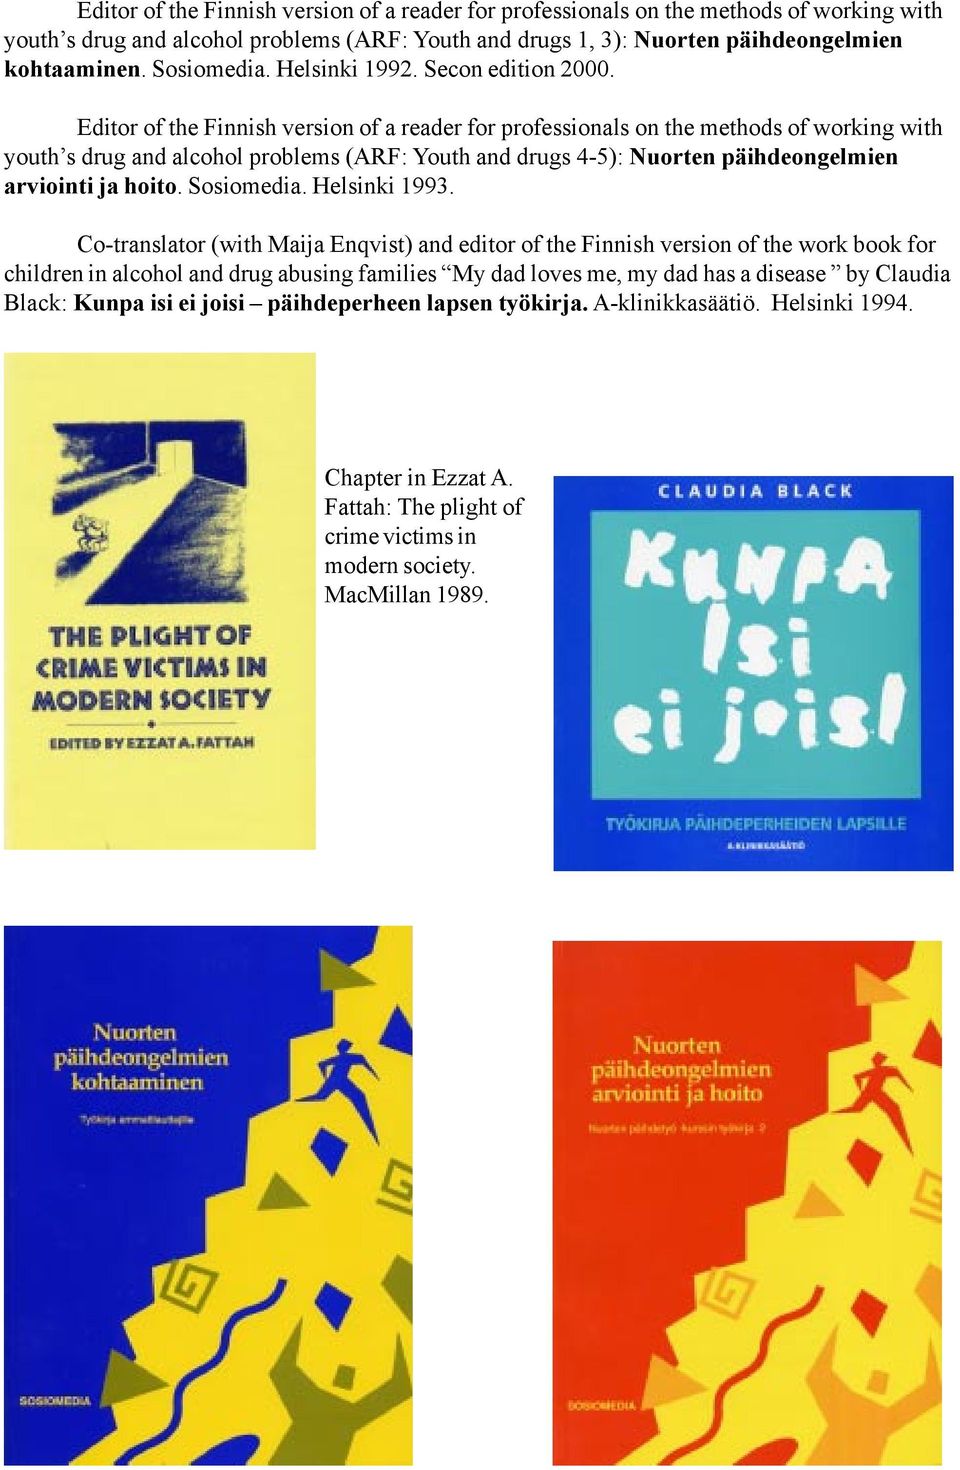 Editor of the Finnish version of a reader for professionals on the methods of working with youth s drug and alcohol problems (ARF: Youth and drugs 4-5): Nuorten päihdeongelmien arviointi ja hoito.